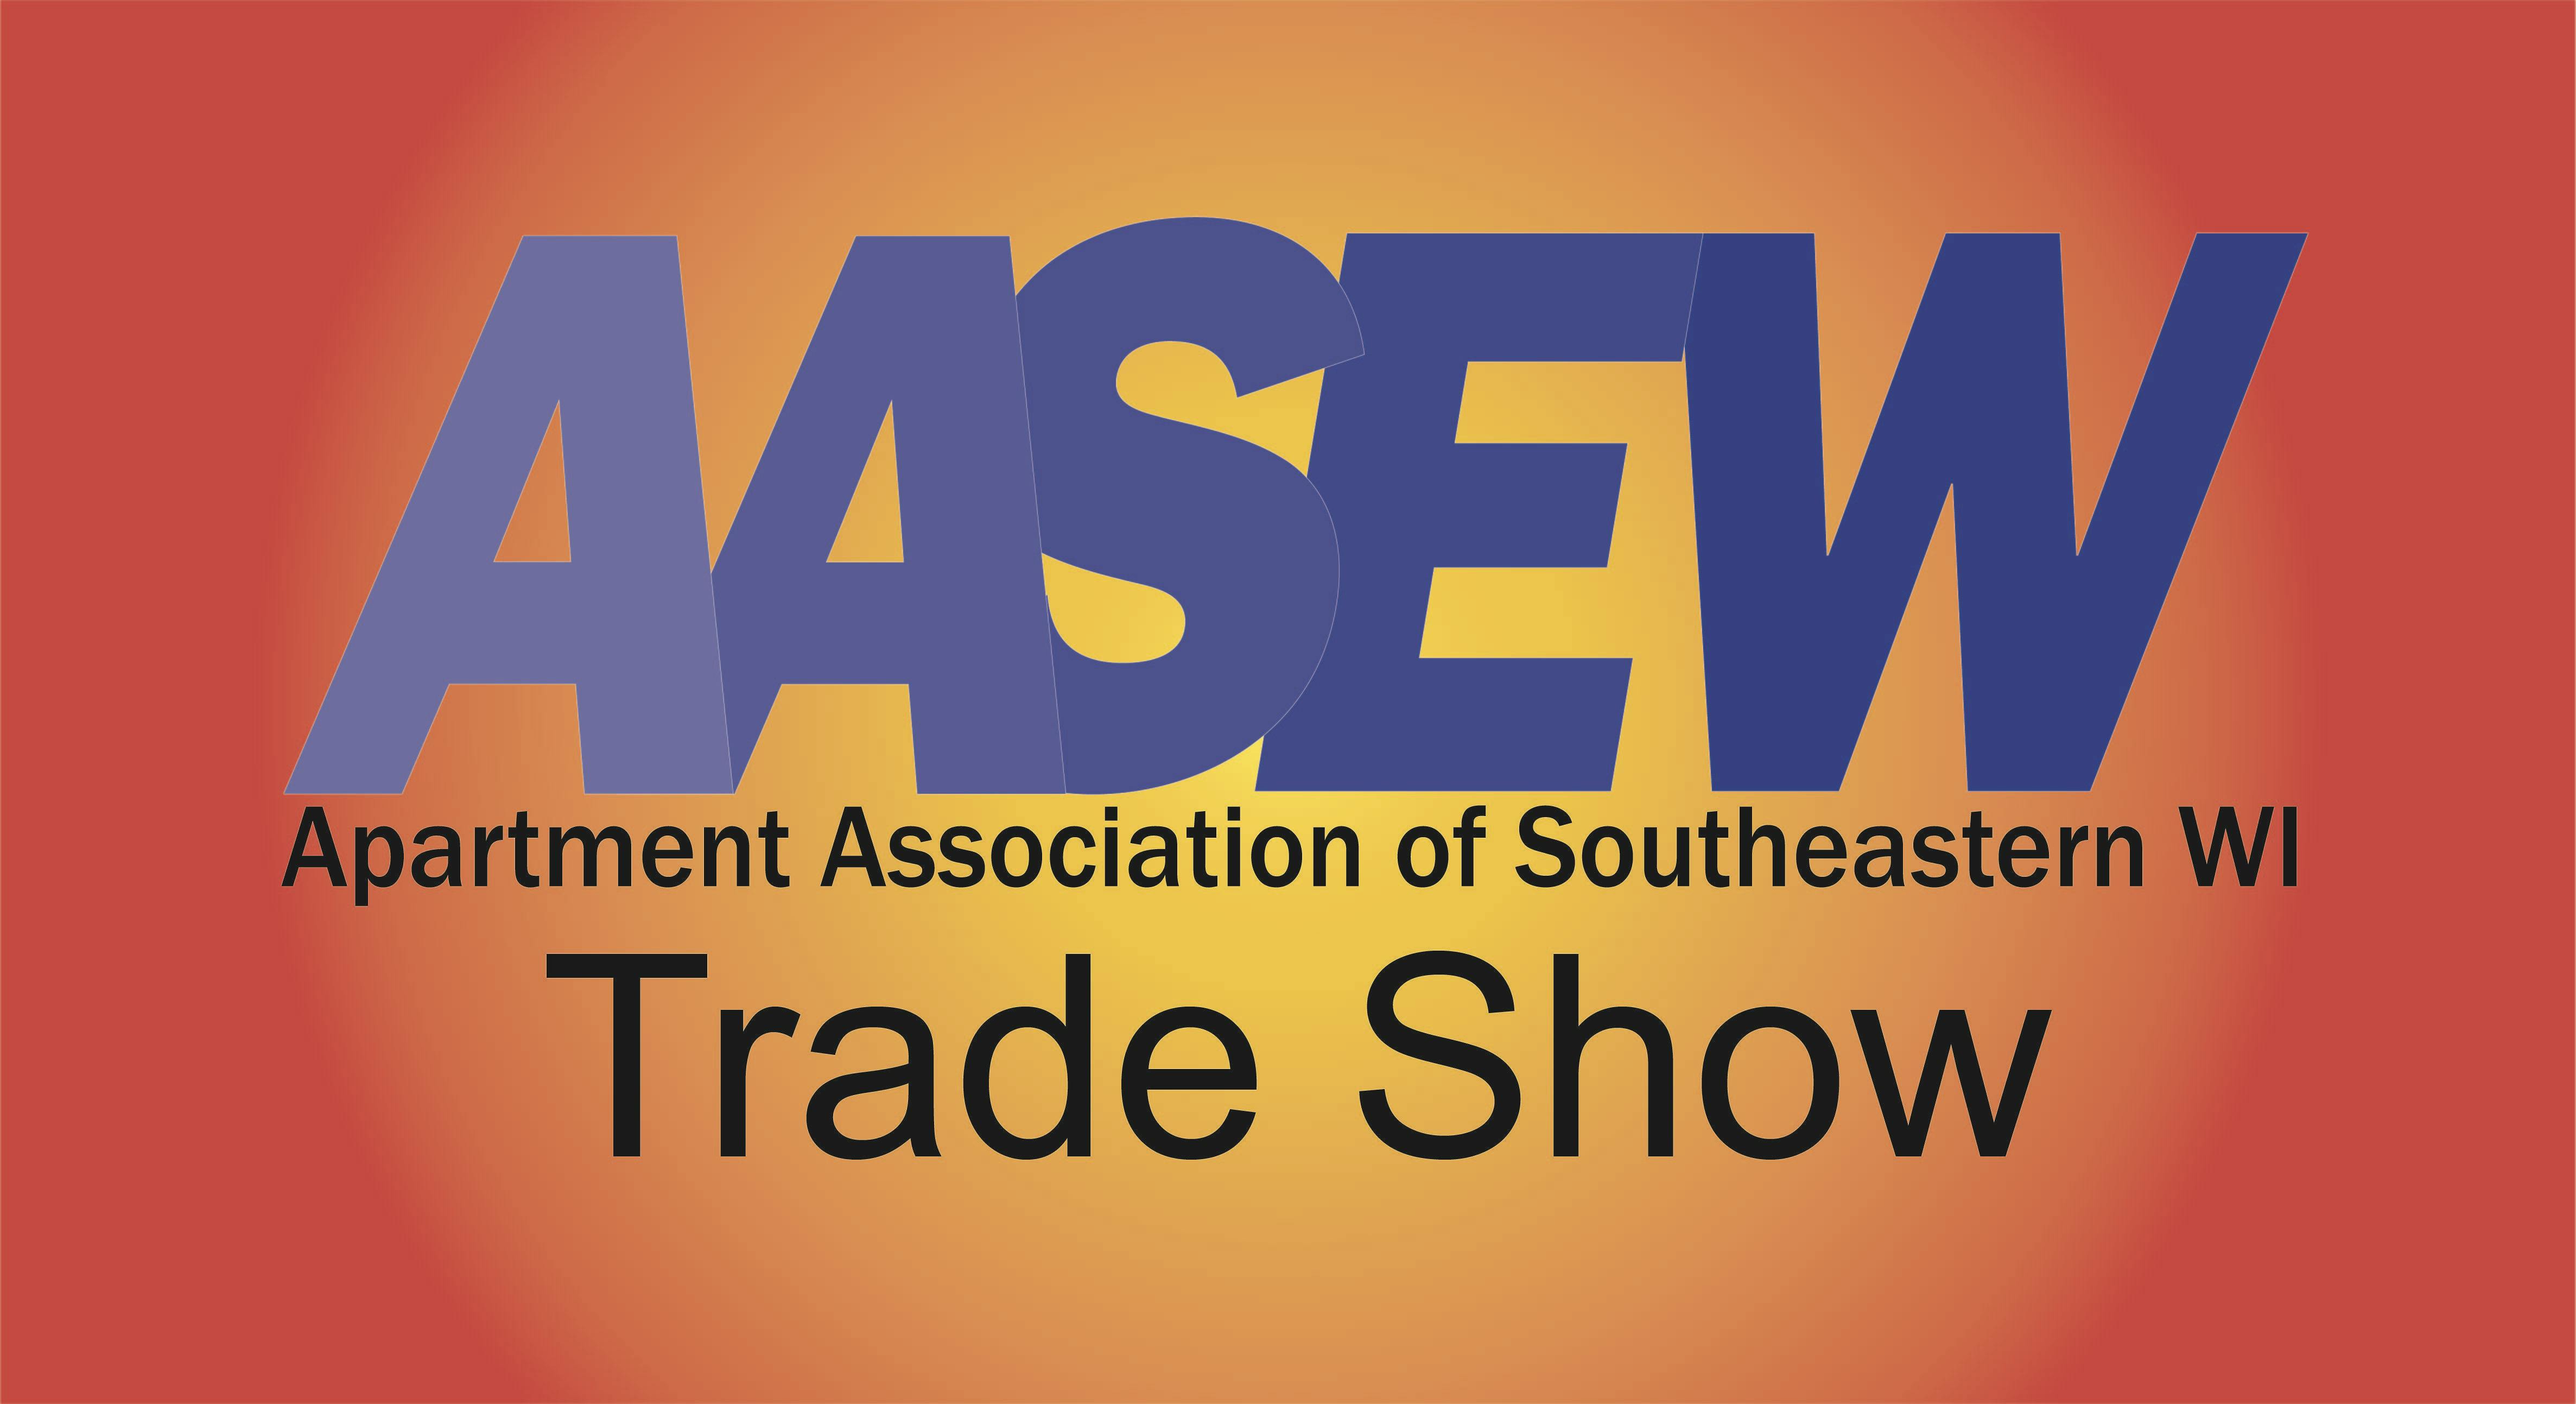 2018 AASEW Tradeshow - Free to Apartment Owners and Managers